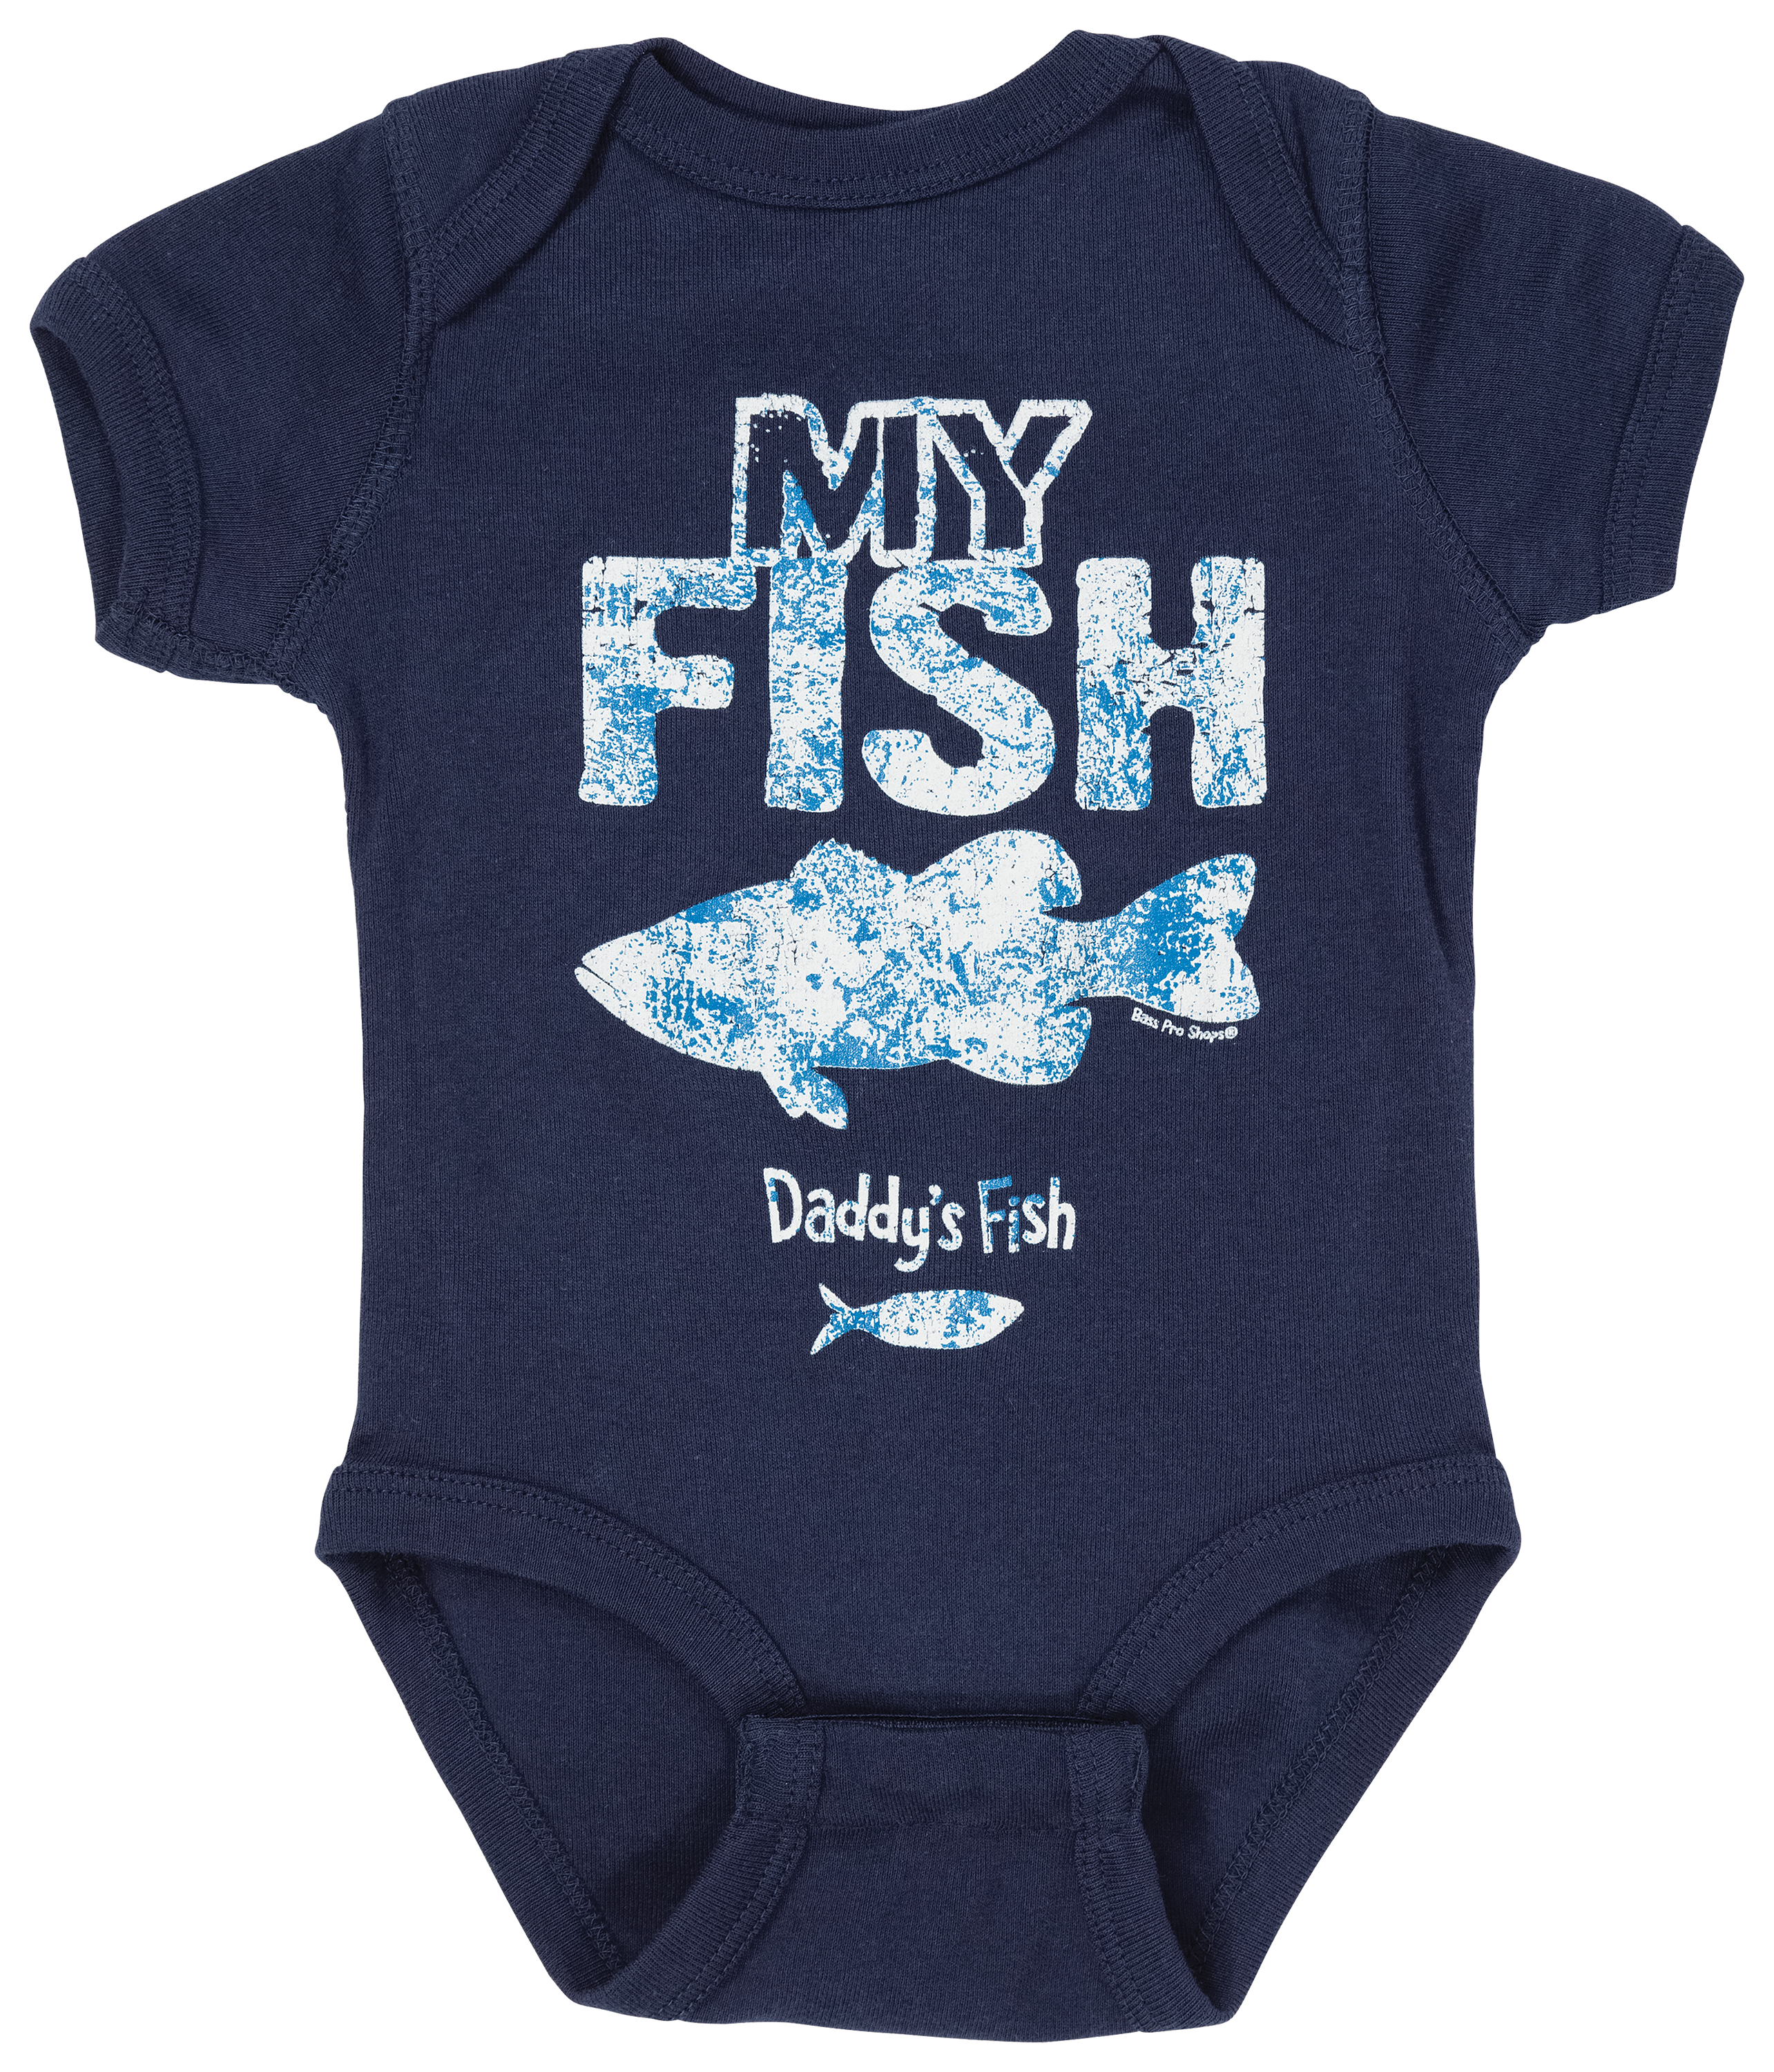 Bass Pro Shops My Fish Daddy's Fish Bodysuit for Babies